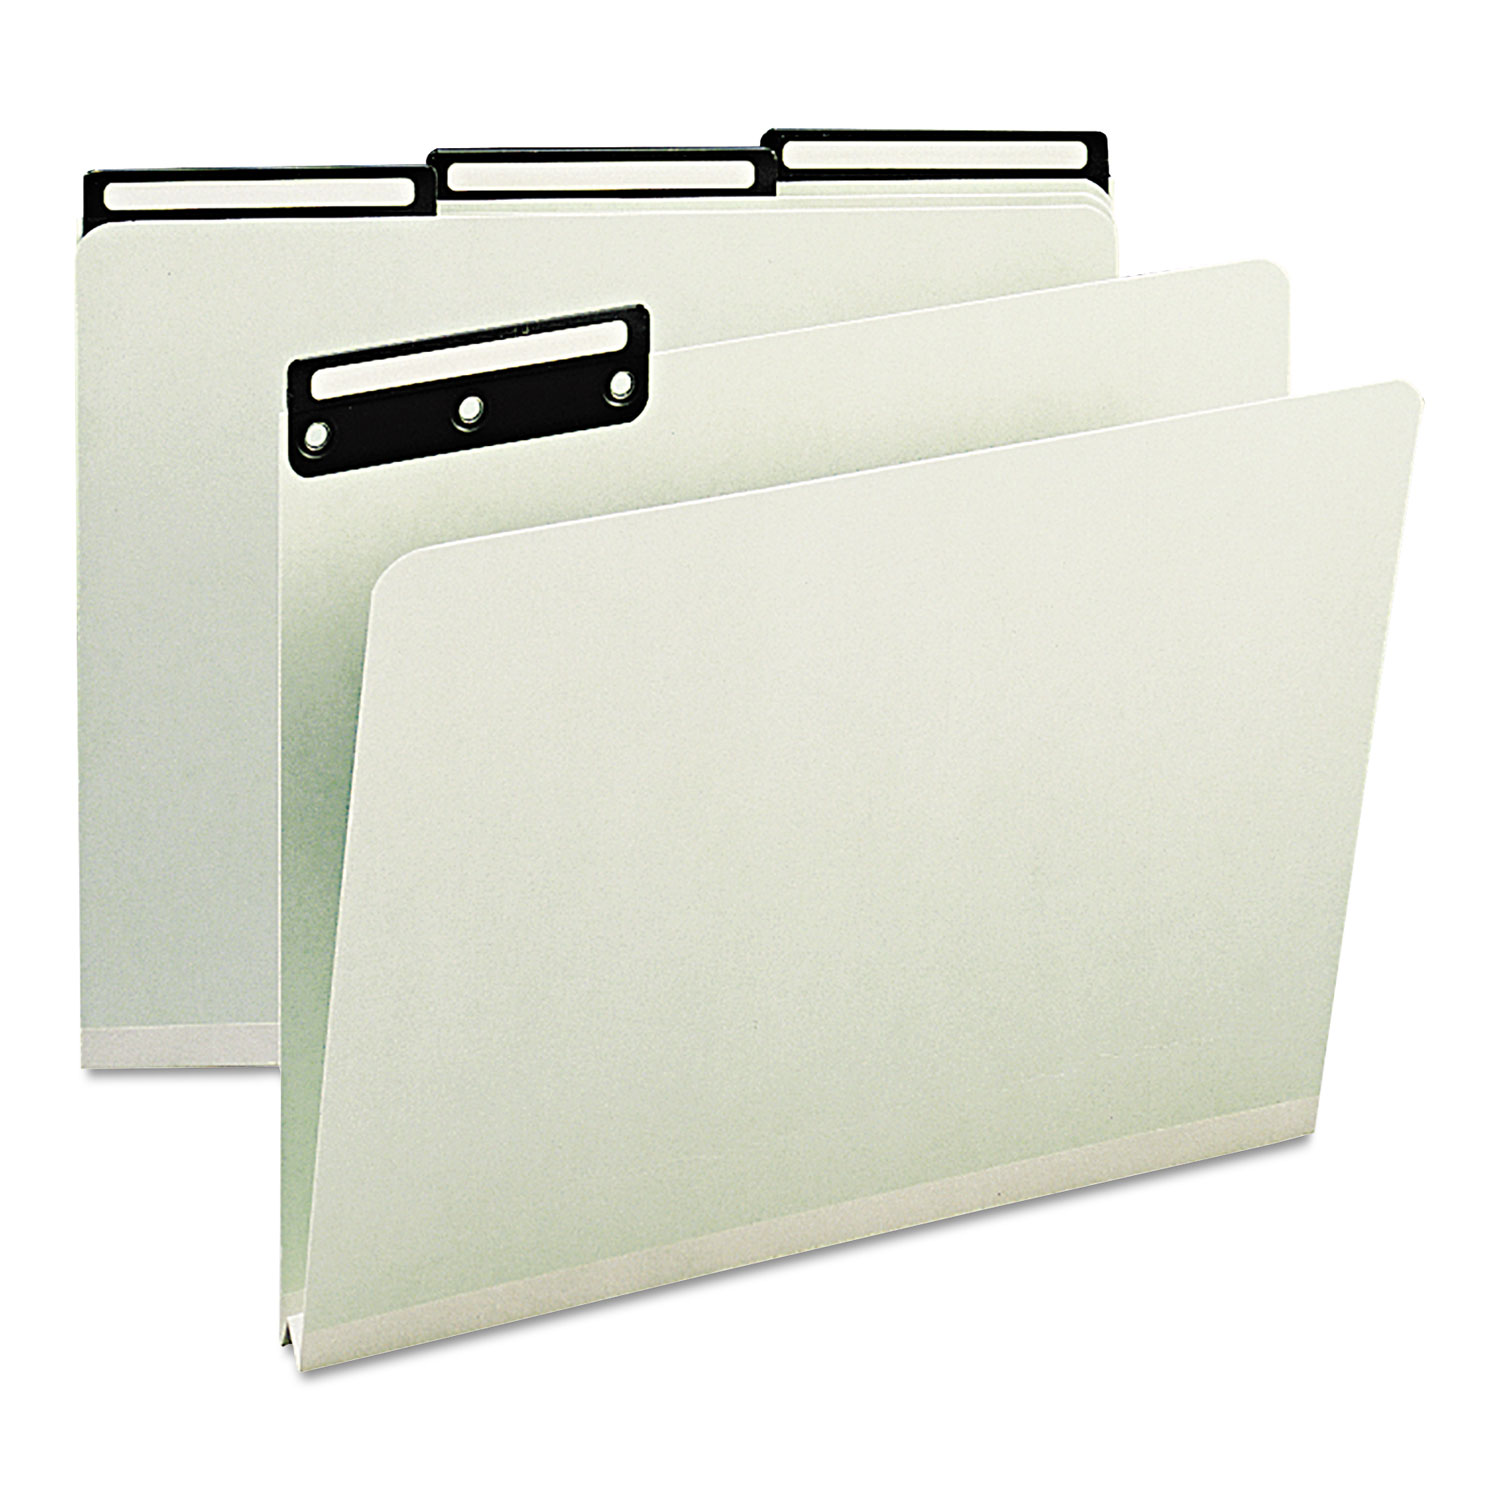  Smead 13430 Recycled Heavy Pressboard File Folders with Insertable Metal Tabs, 1/3-Cut Tabs, Letter Size, Gray-Green, 25/Box (SMD13430) 